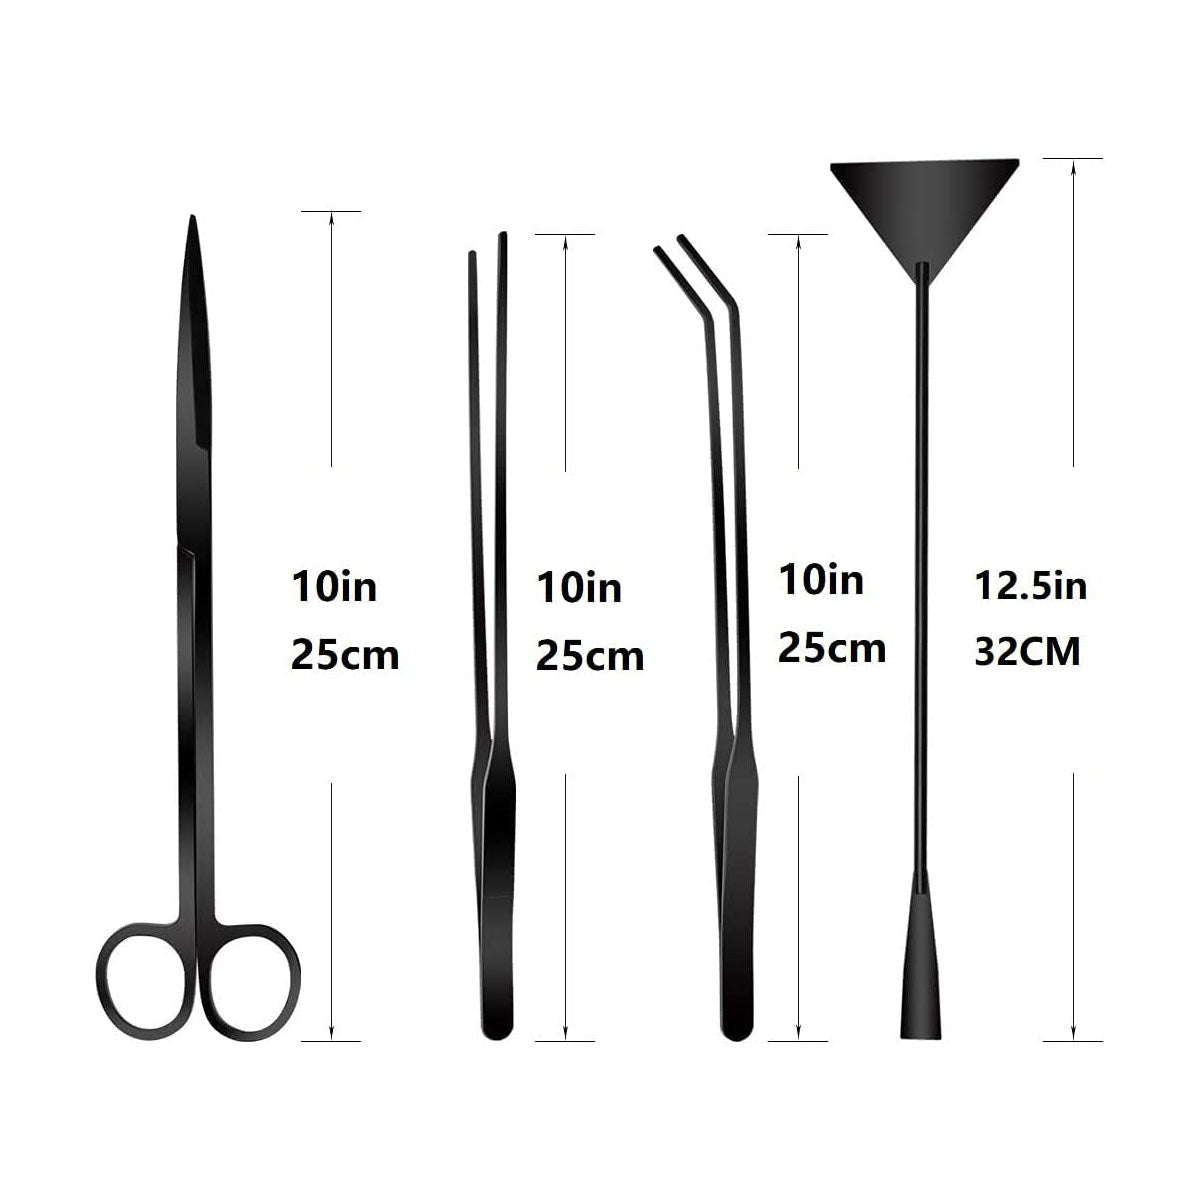 DS BS 4-Piece Aquarium Tool Set for Aquascaping and Cleaning